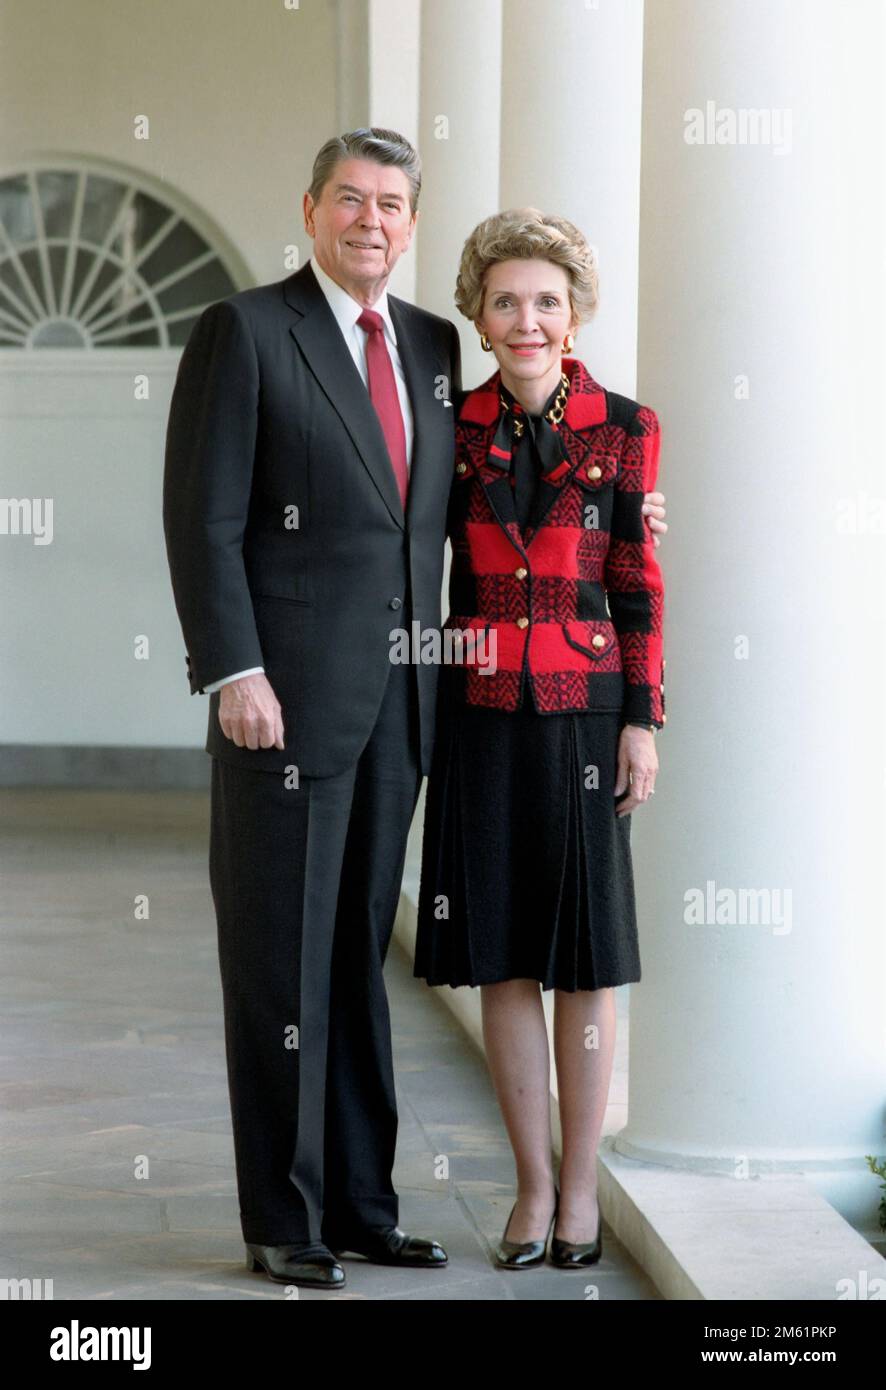 3/3/1987 President Reagan and Nancy Reagan pose on their 35th wedding anniversary on the White House colonnade President Ronald Reagan and Nancy Reagan pose on their 35th wedding anniversary on the White House colonnade, March 3 1987 Stock Photo